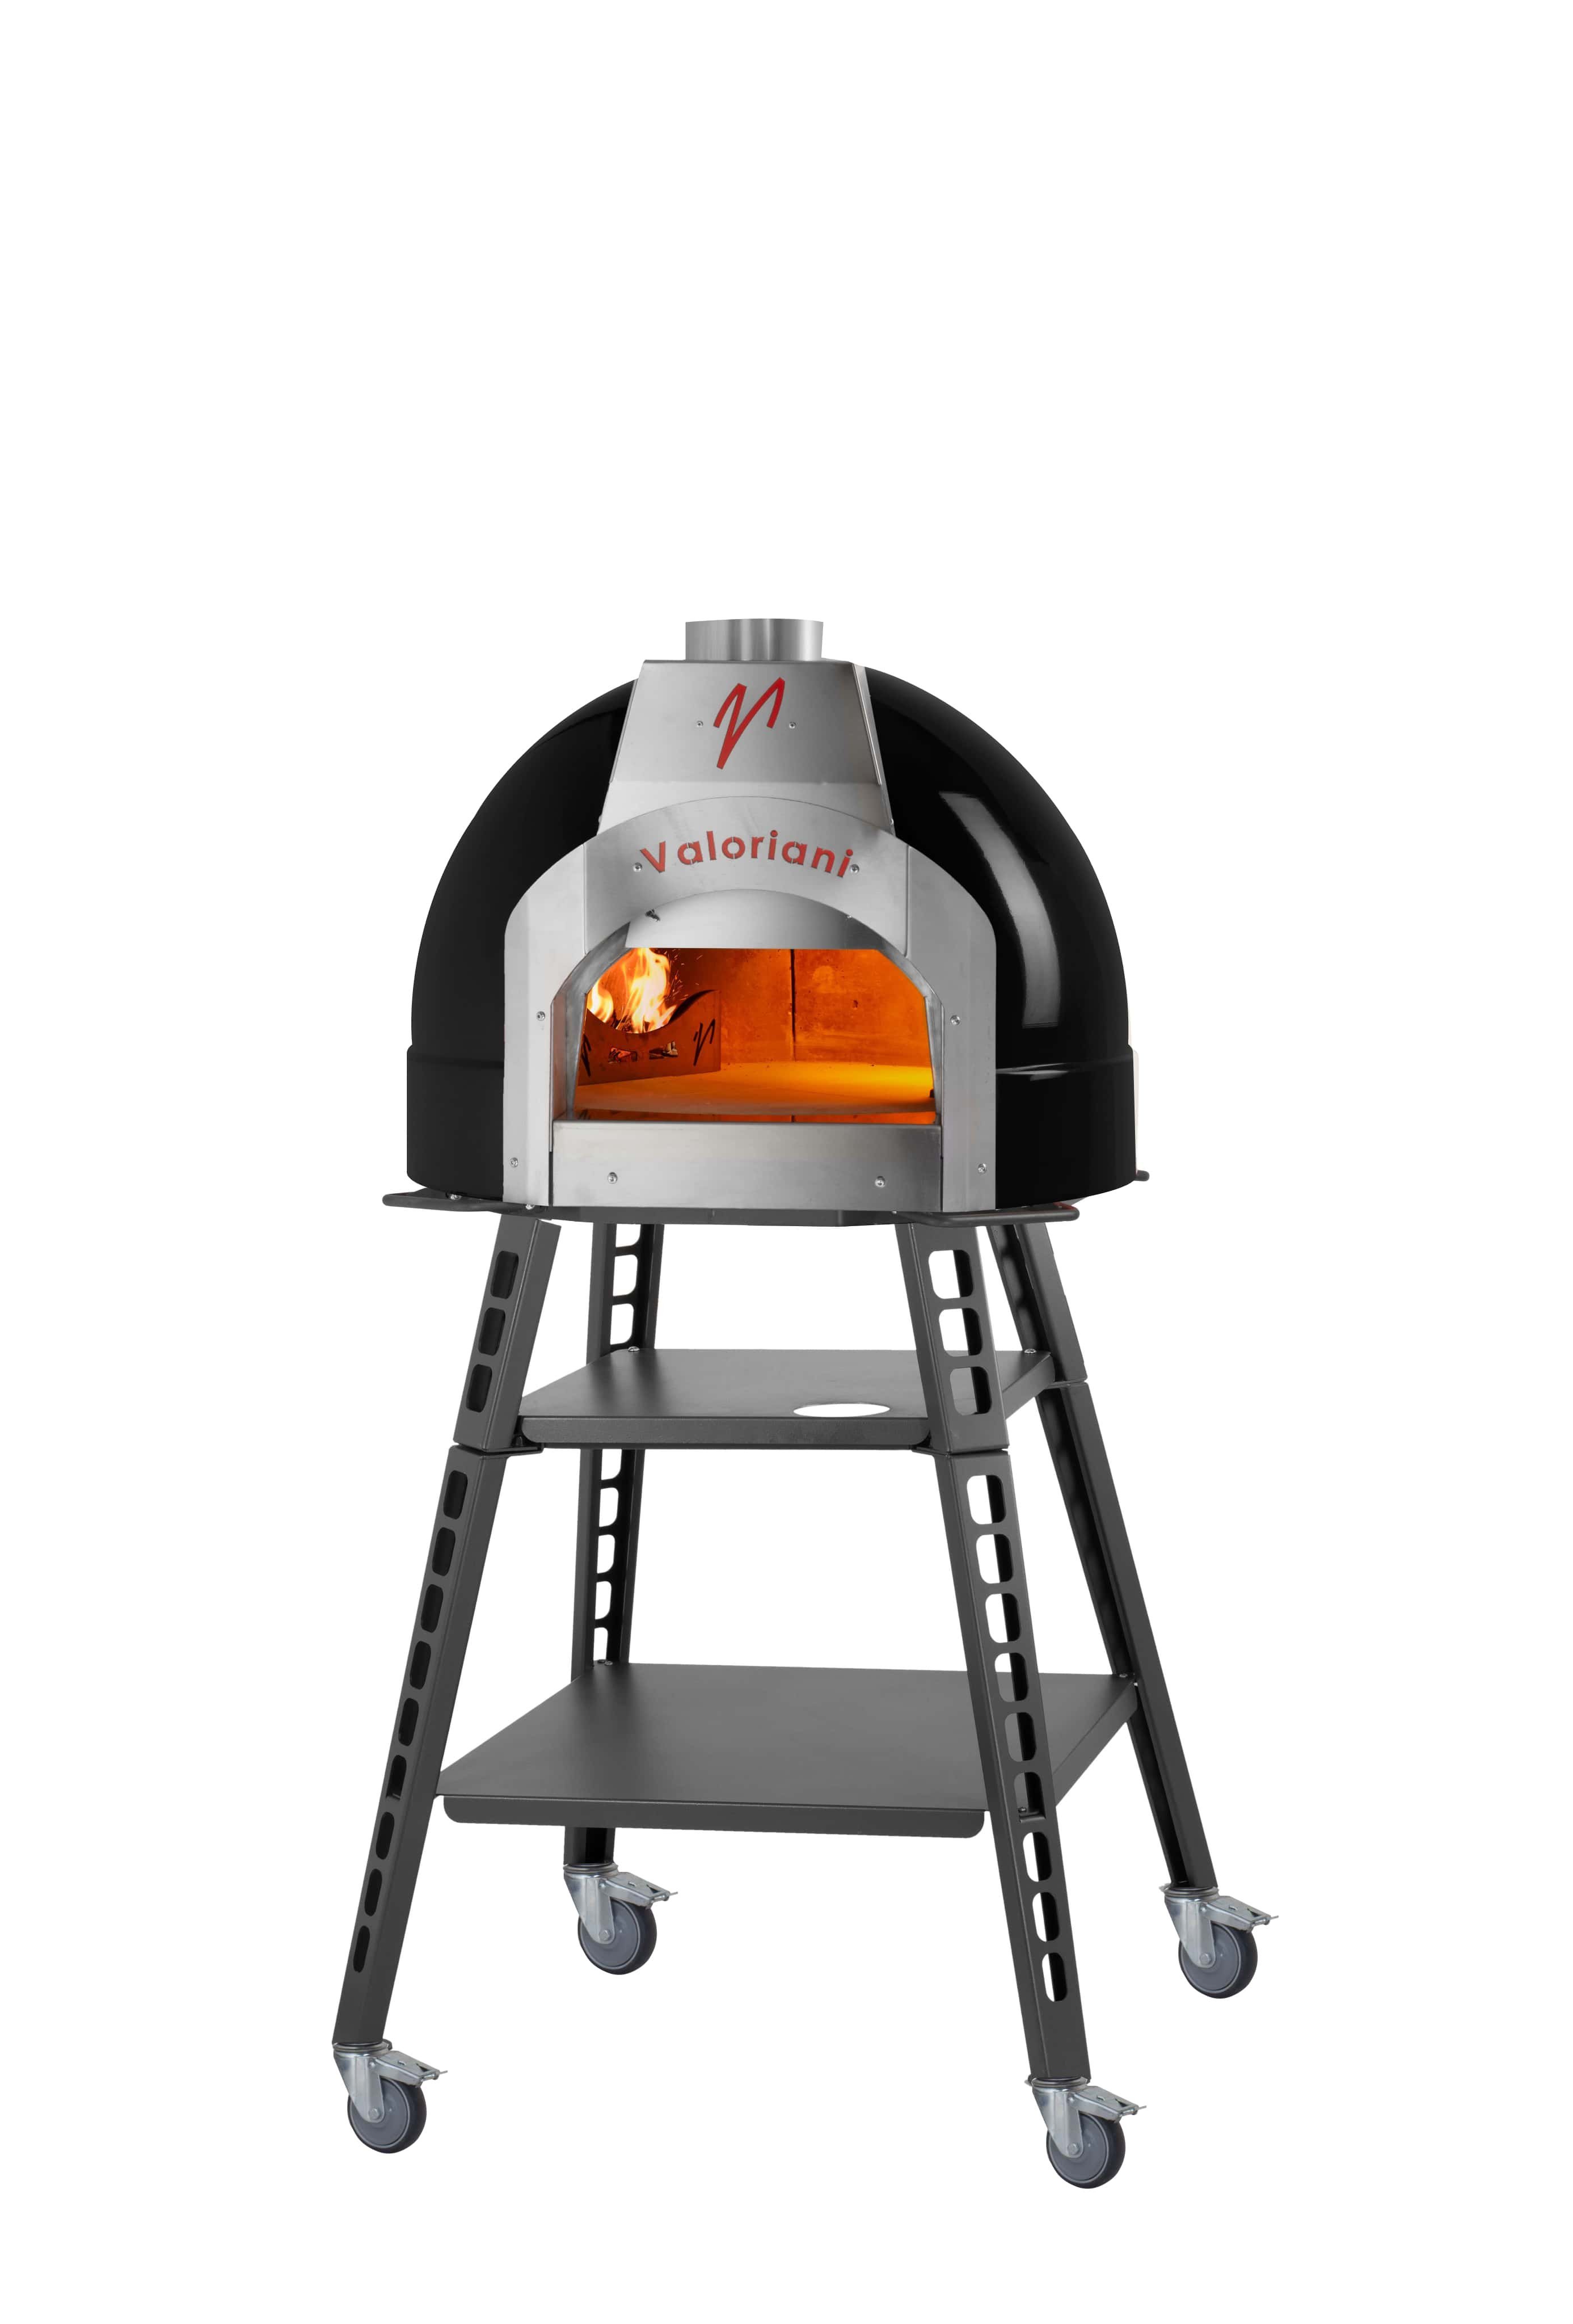 Wood oven Valoriani Baby, 60cm diameter, incl. complete base, black